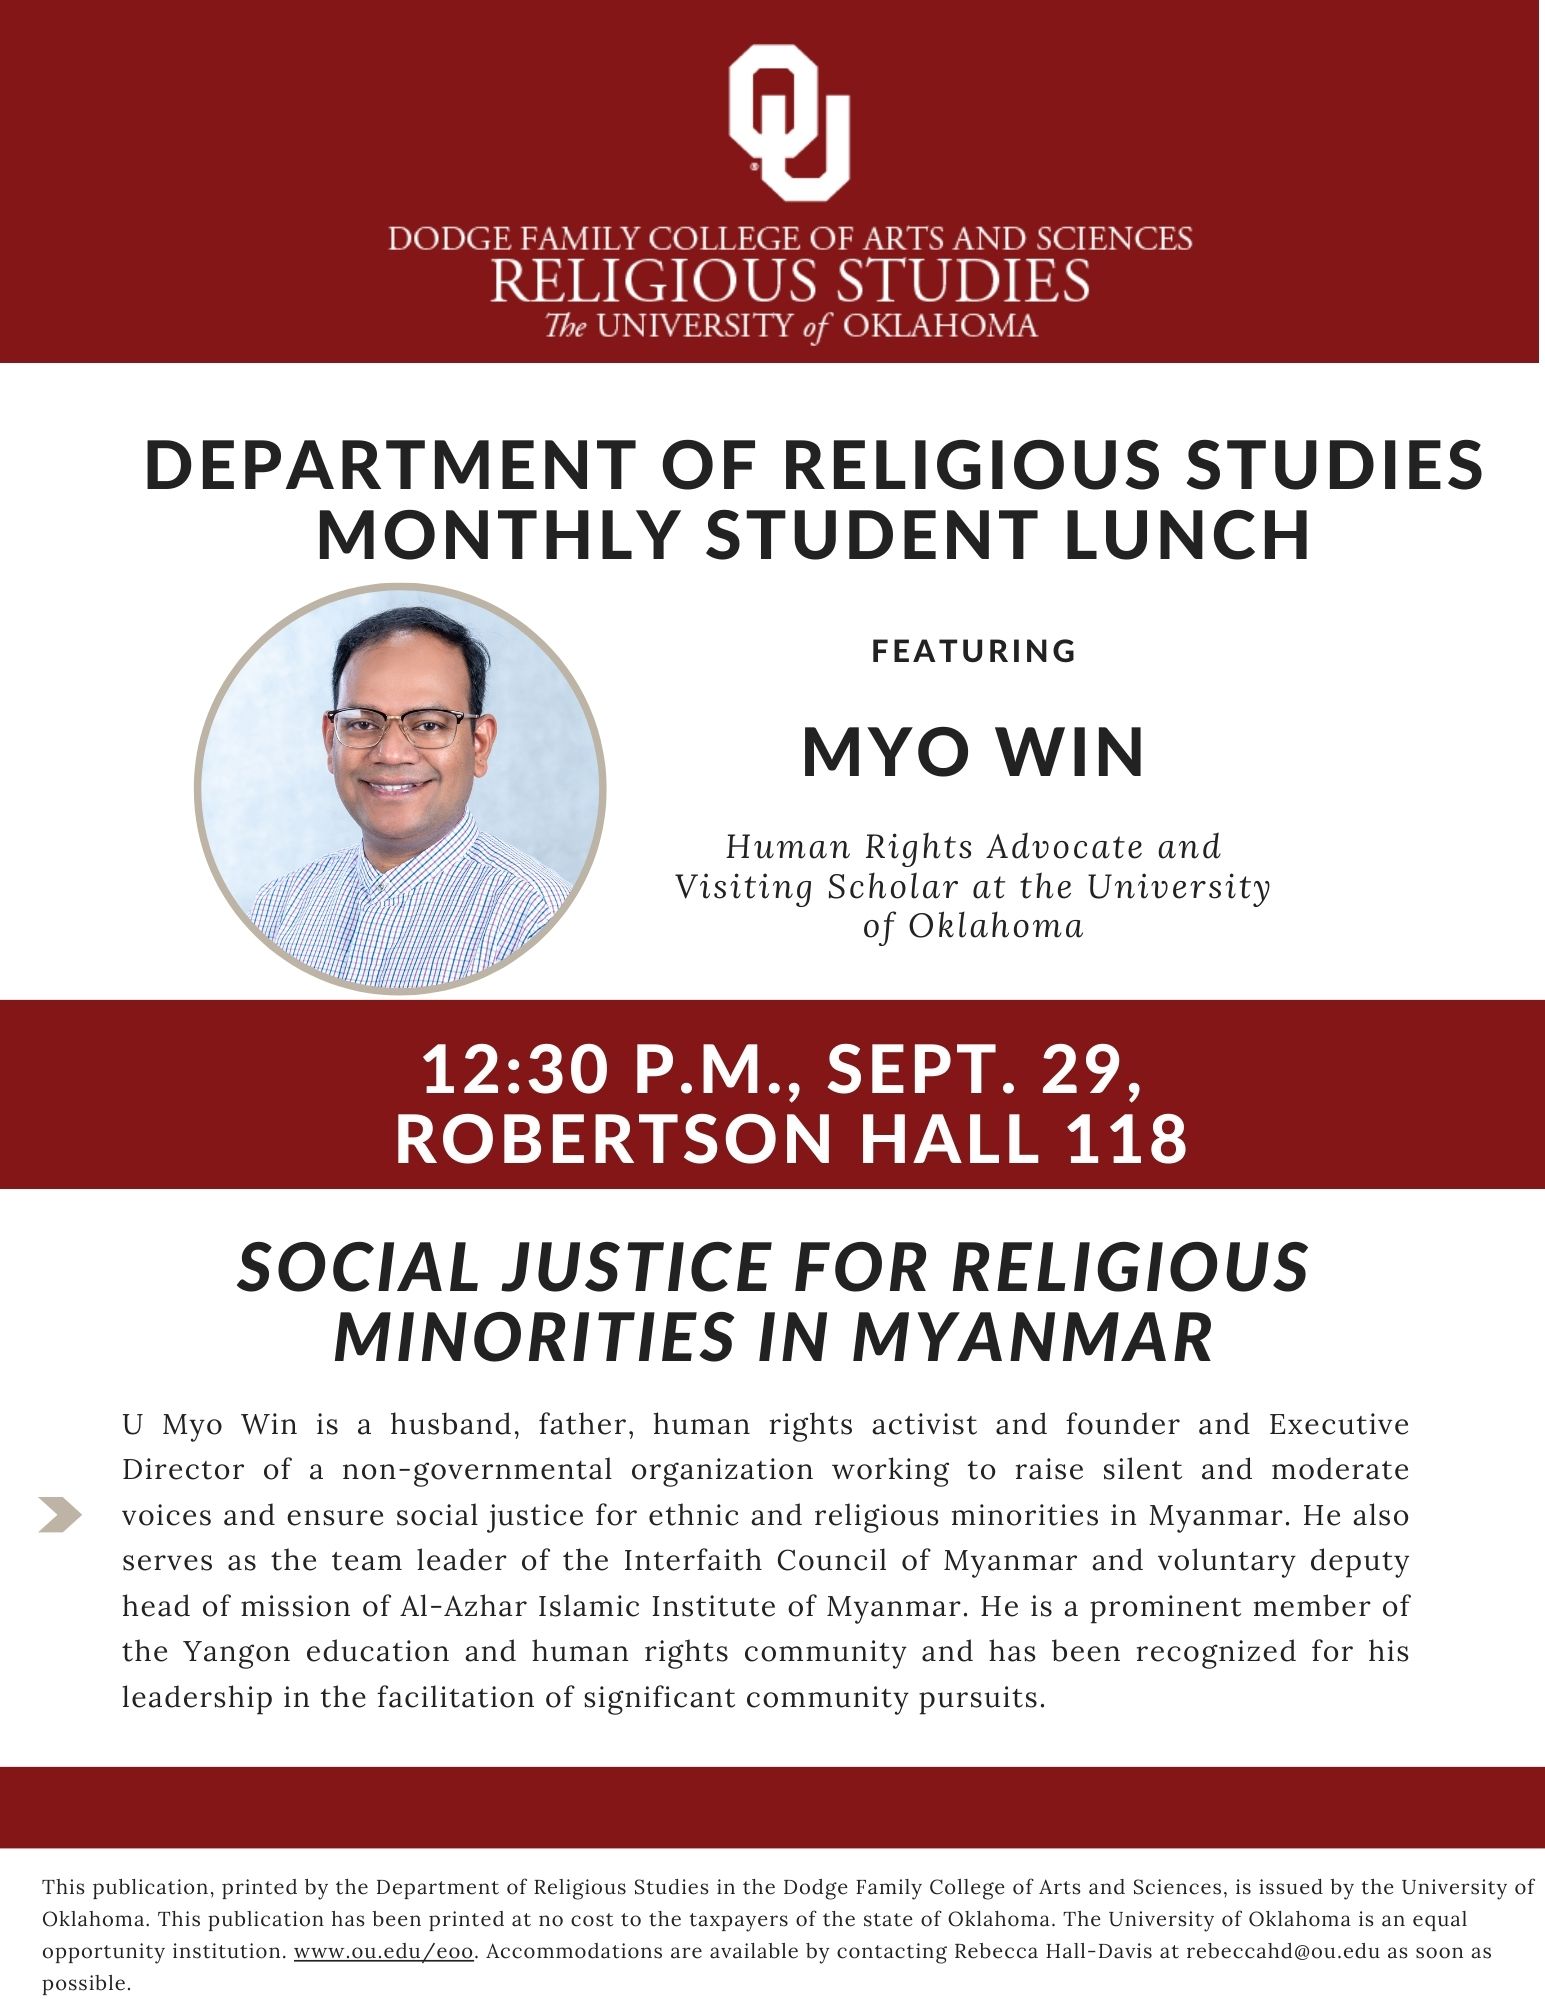 Join us for the RELS Student Lunch with featured speaker Myo Win, a human rights activist and visiting scholar at OU, who works for social justice for ethnic and religious minorities in Myanmar.  RELS Student Lunch "Social Justice for Religious Minorities in Myanmar" Myo Win 12:30 p.m., Sept. 29 Robertson Hall 118